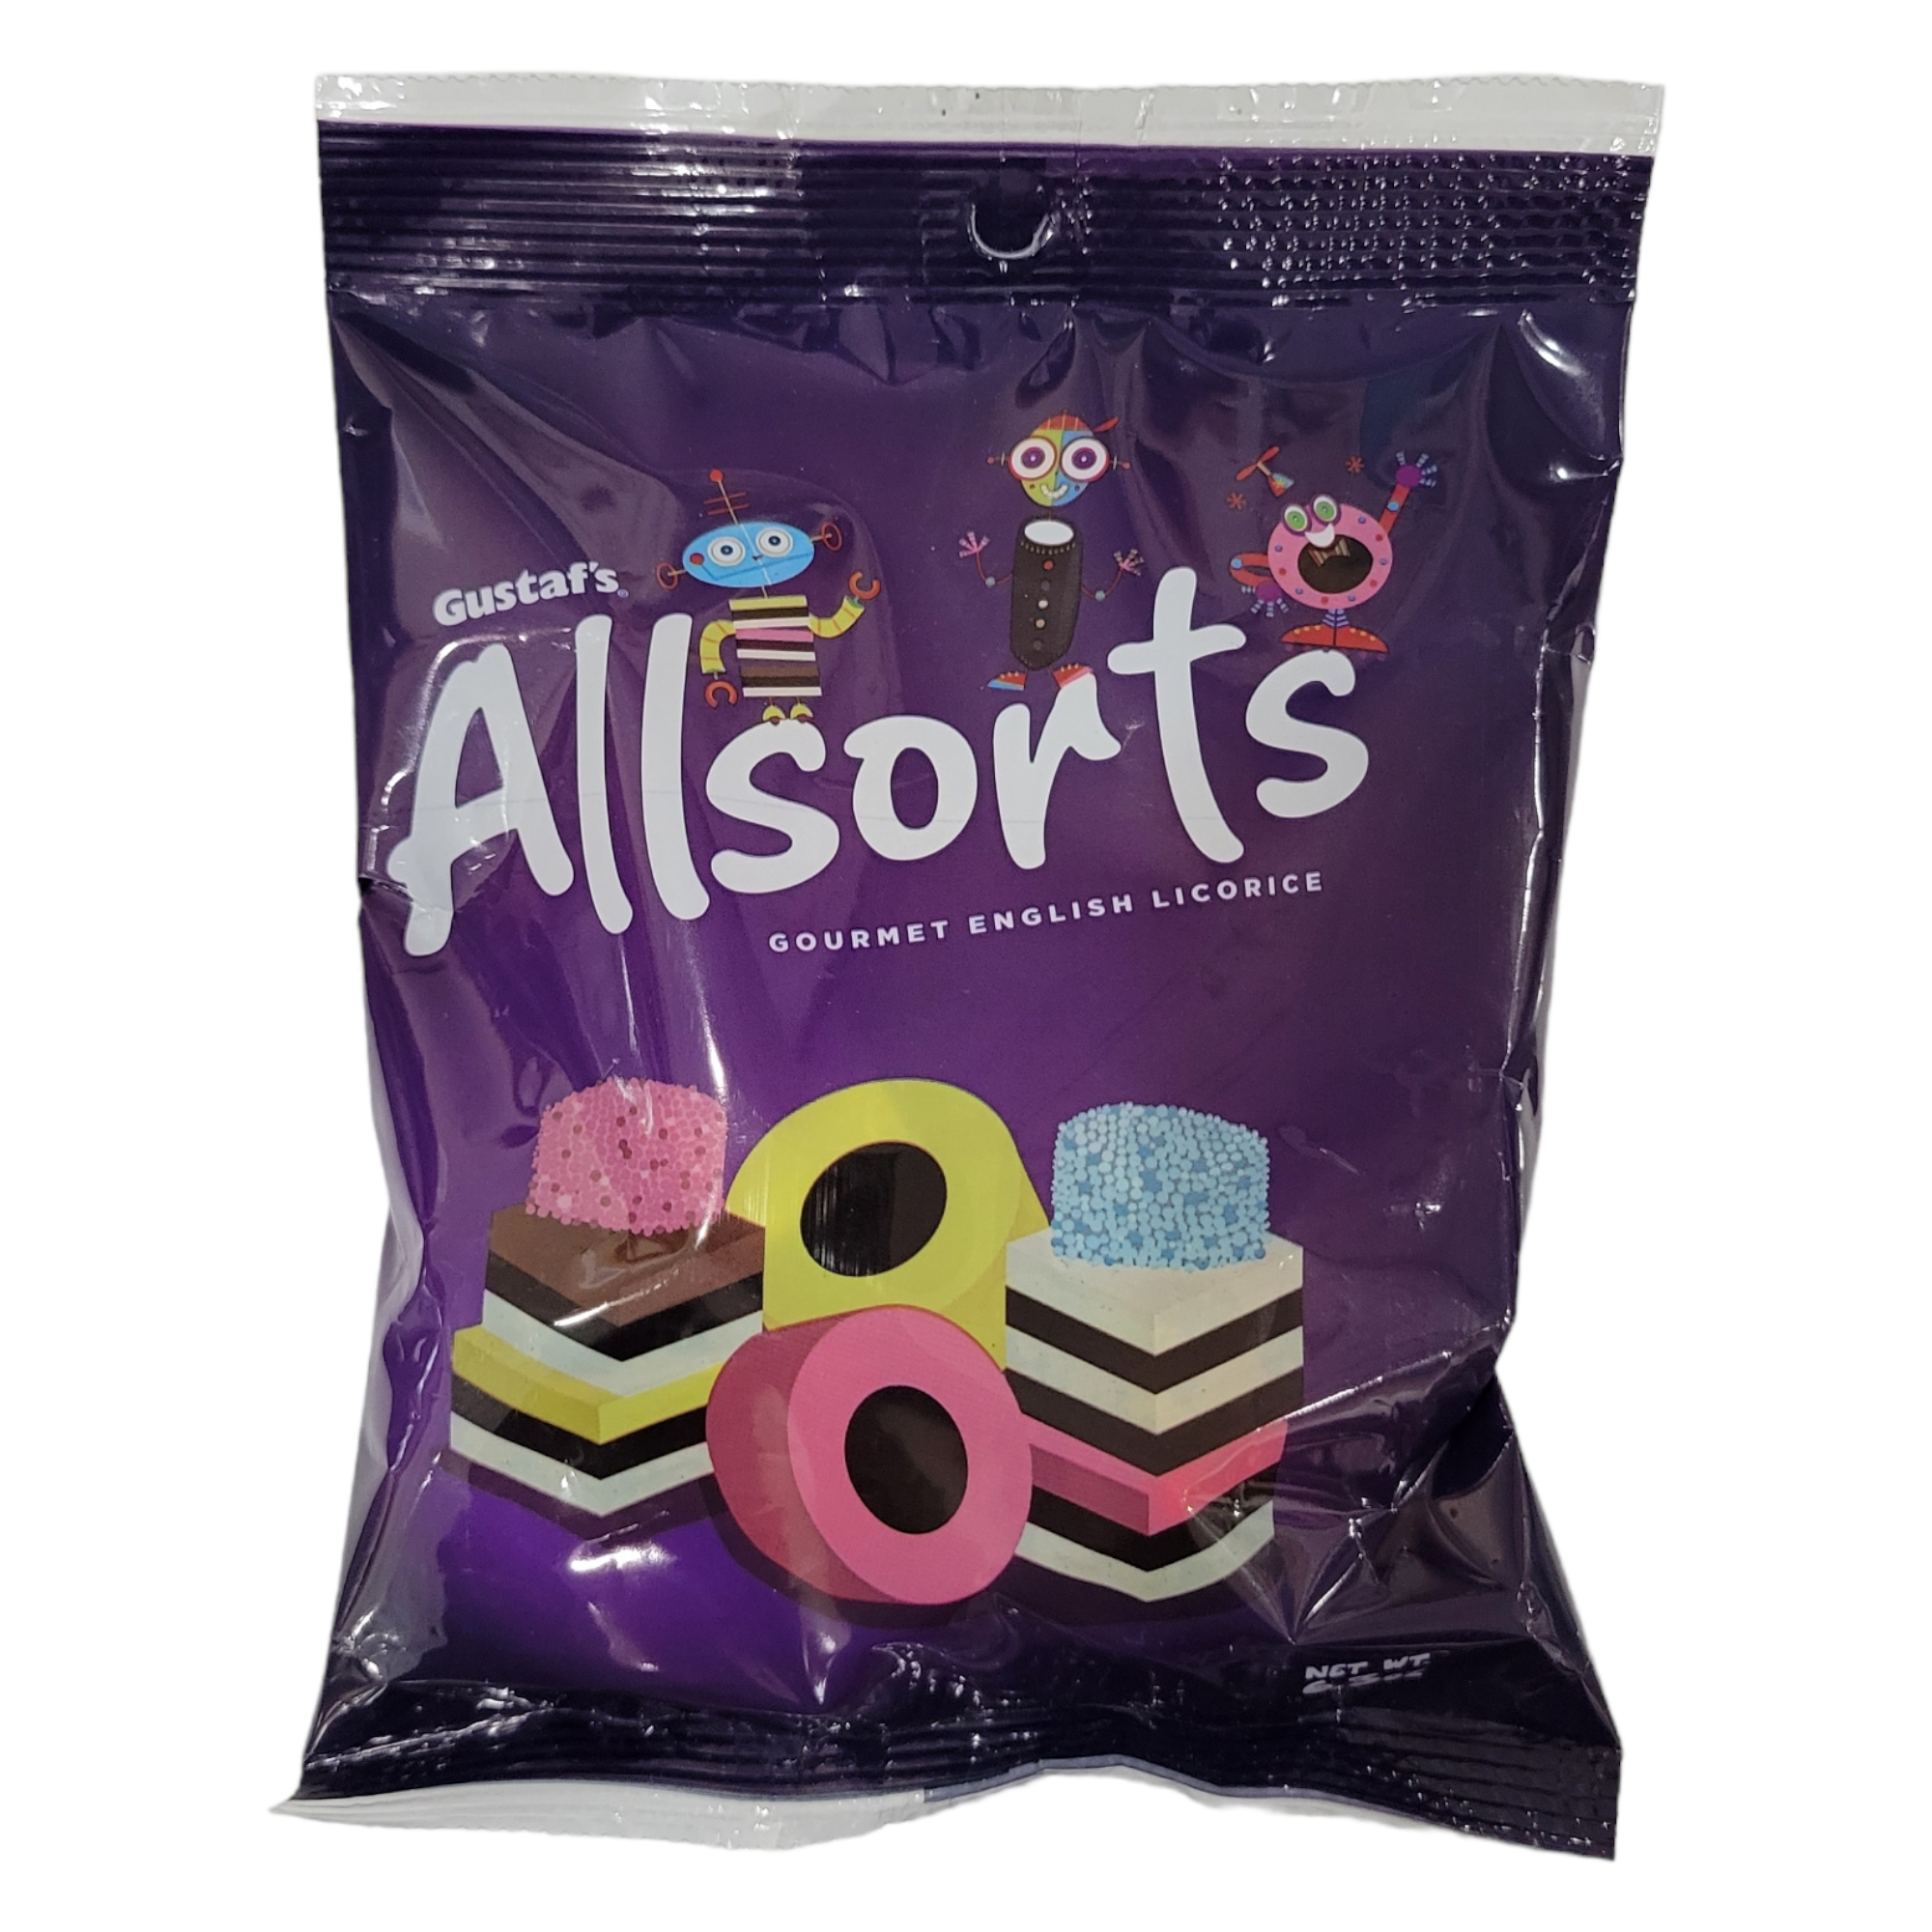 Candy: Gustaf's - Allsorts Gourmet English Licorice